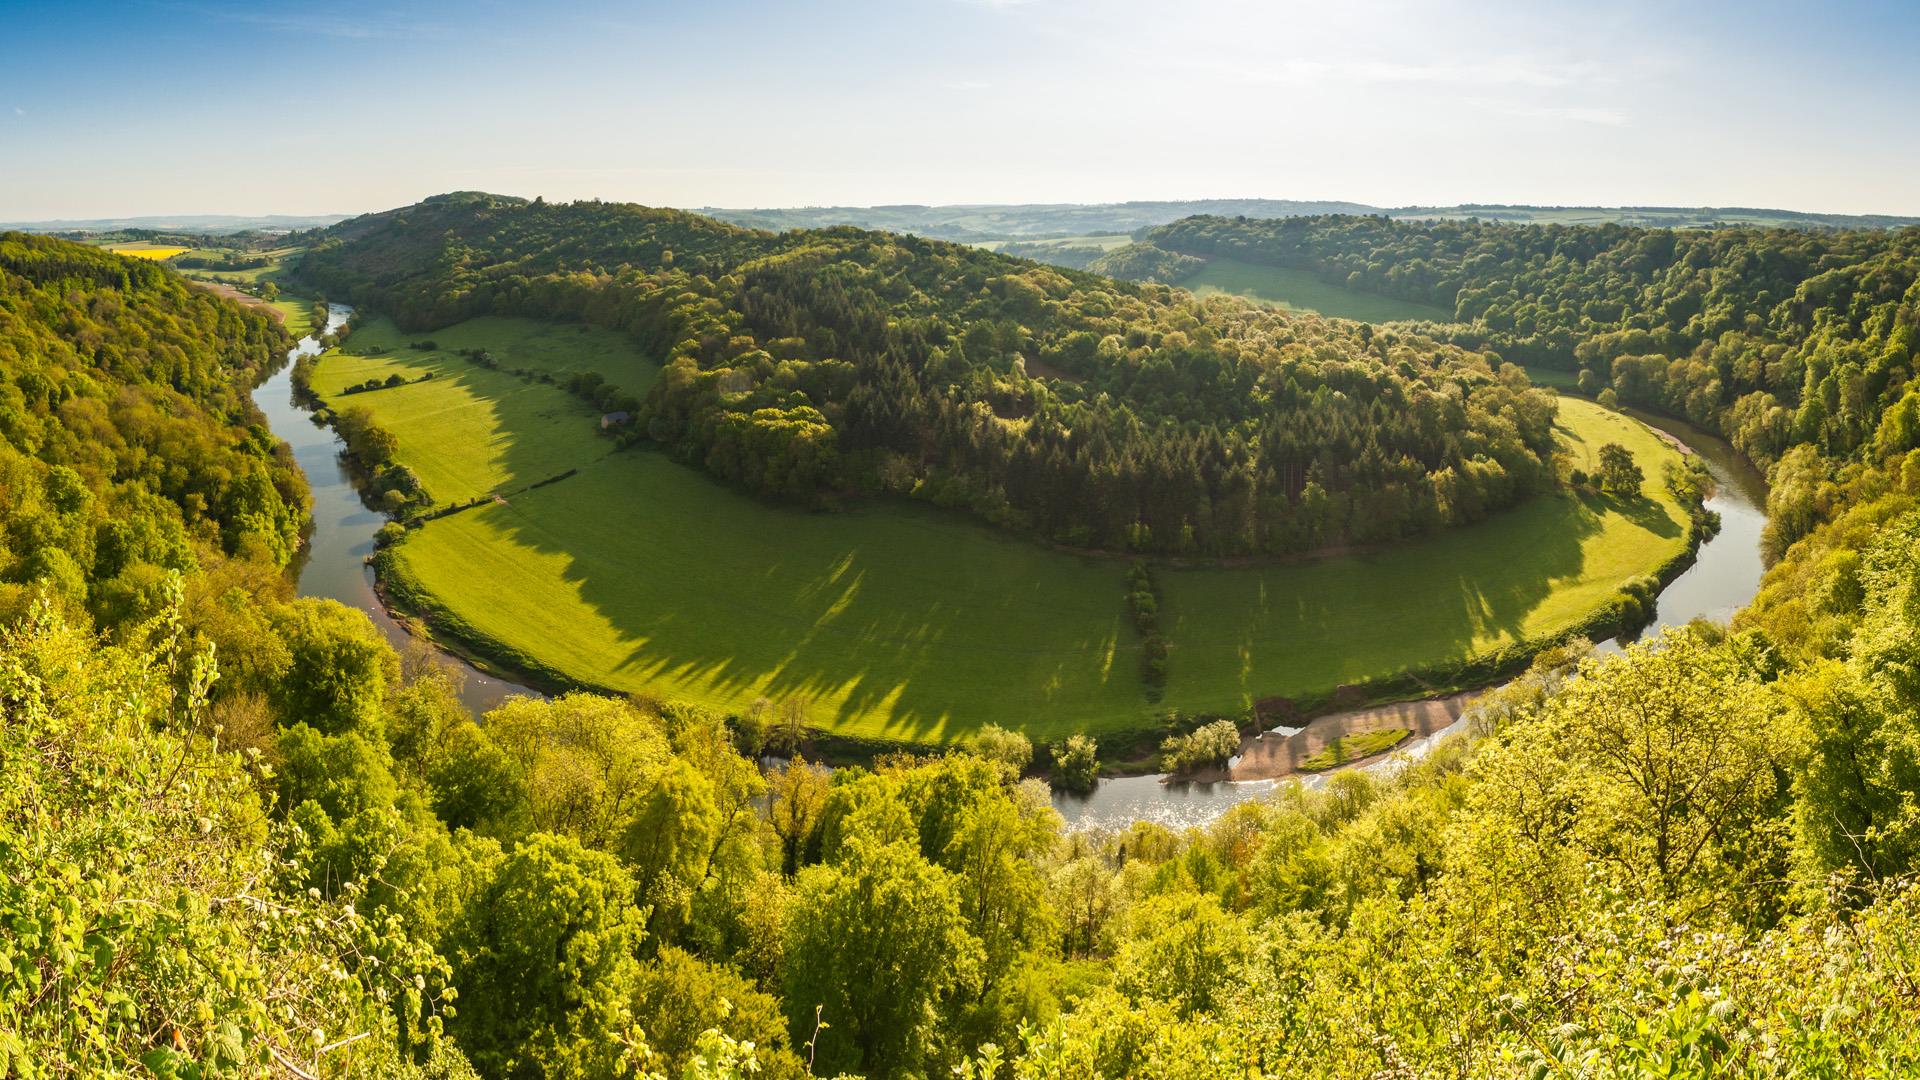 Discover the Forest of Dean and Wye Valley